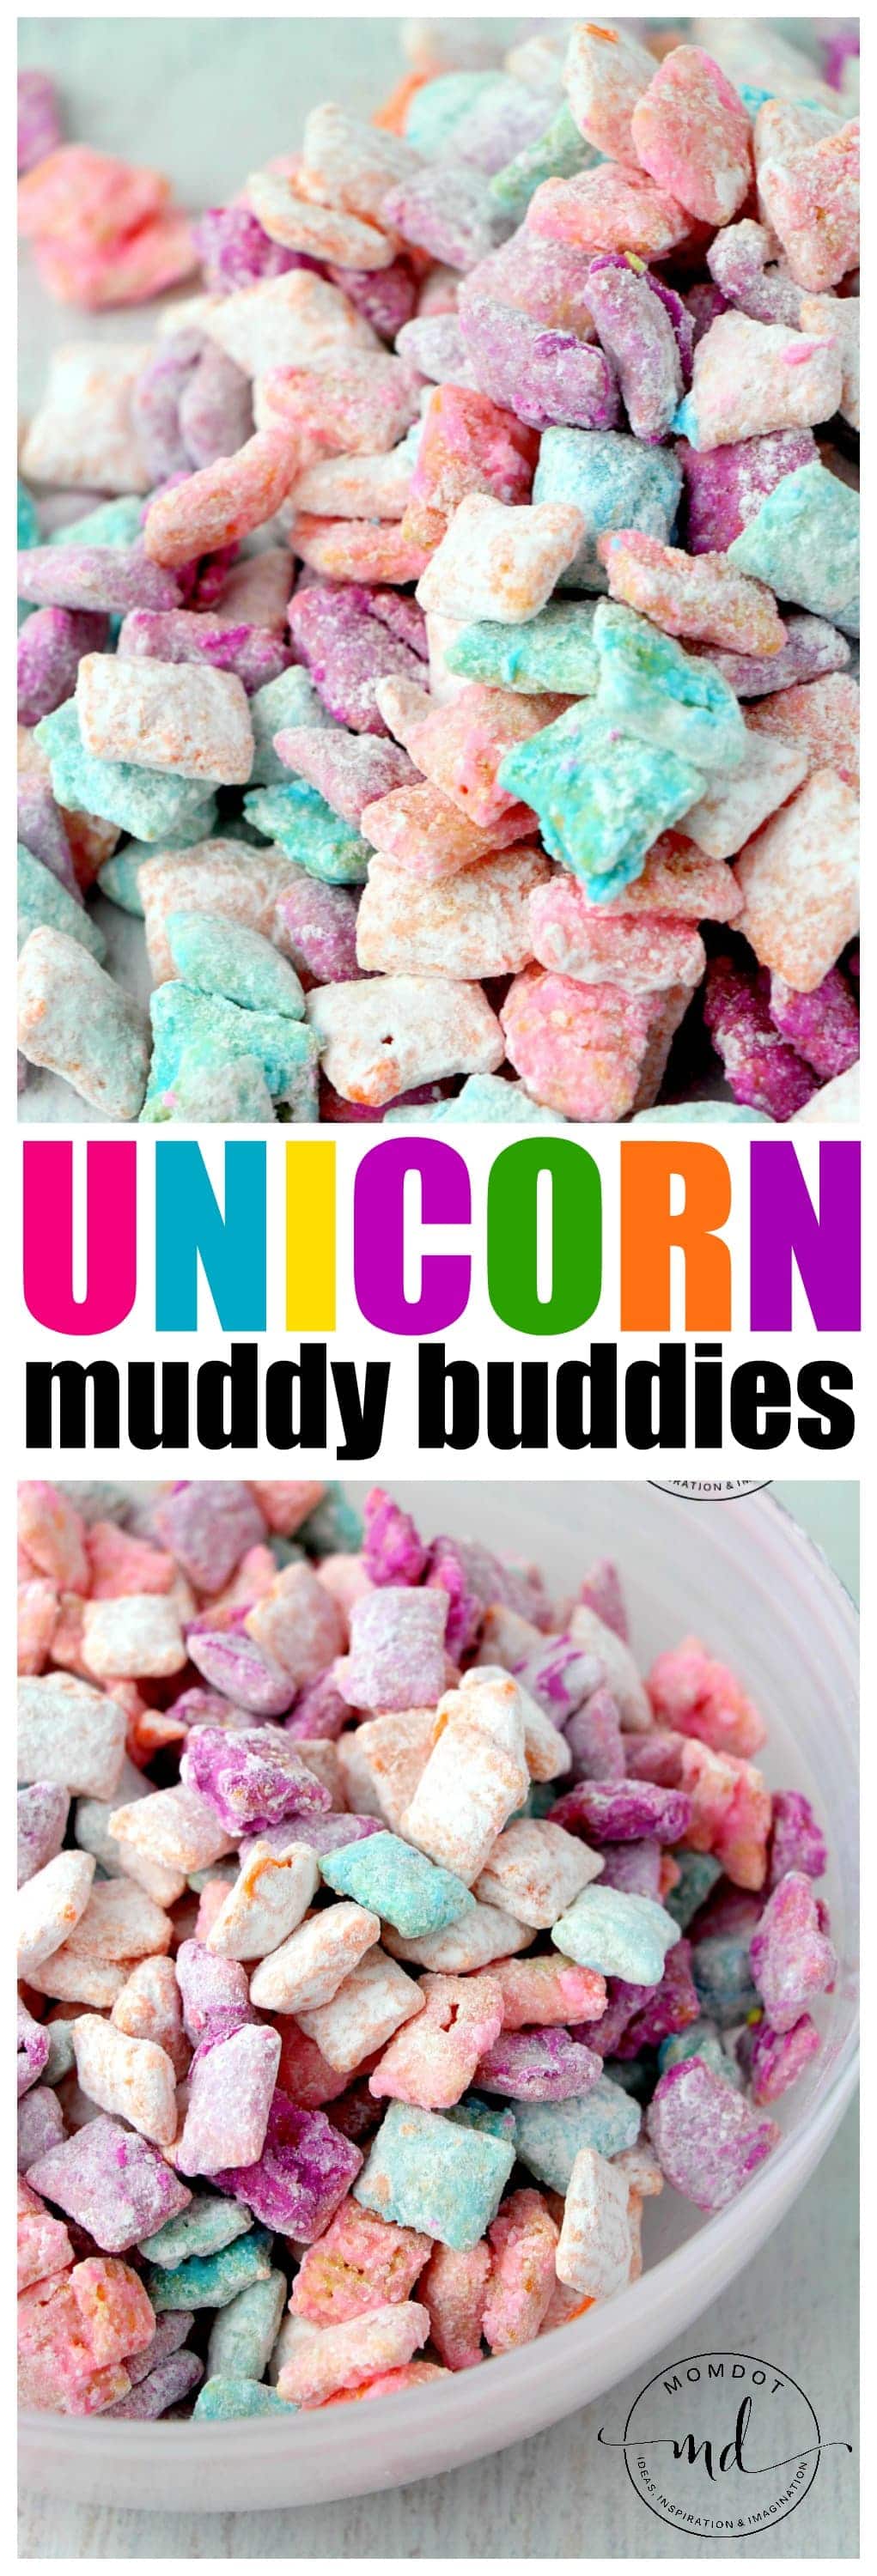 Unicorn Poop Muddy Buddies made with Chex cereal in bright rainbow colors